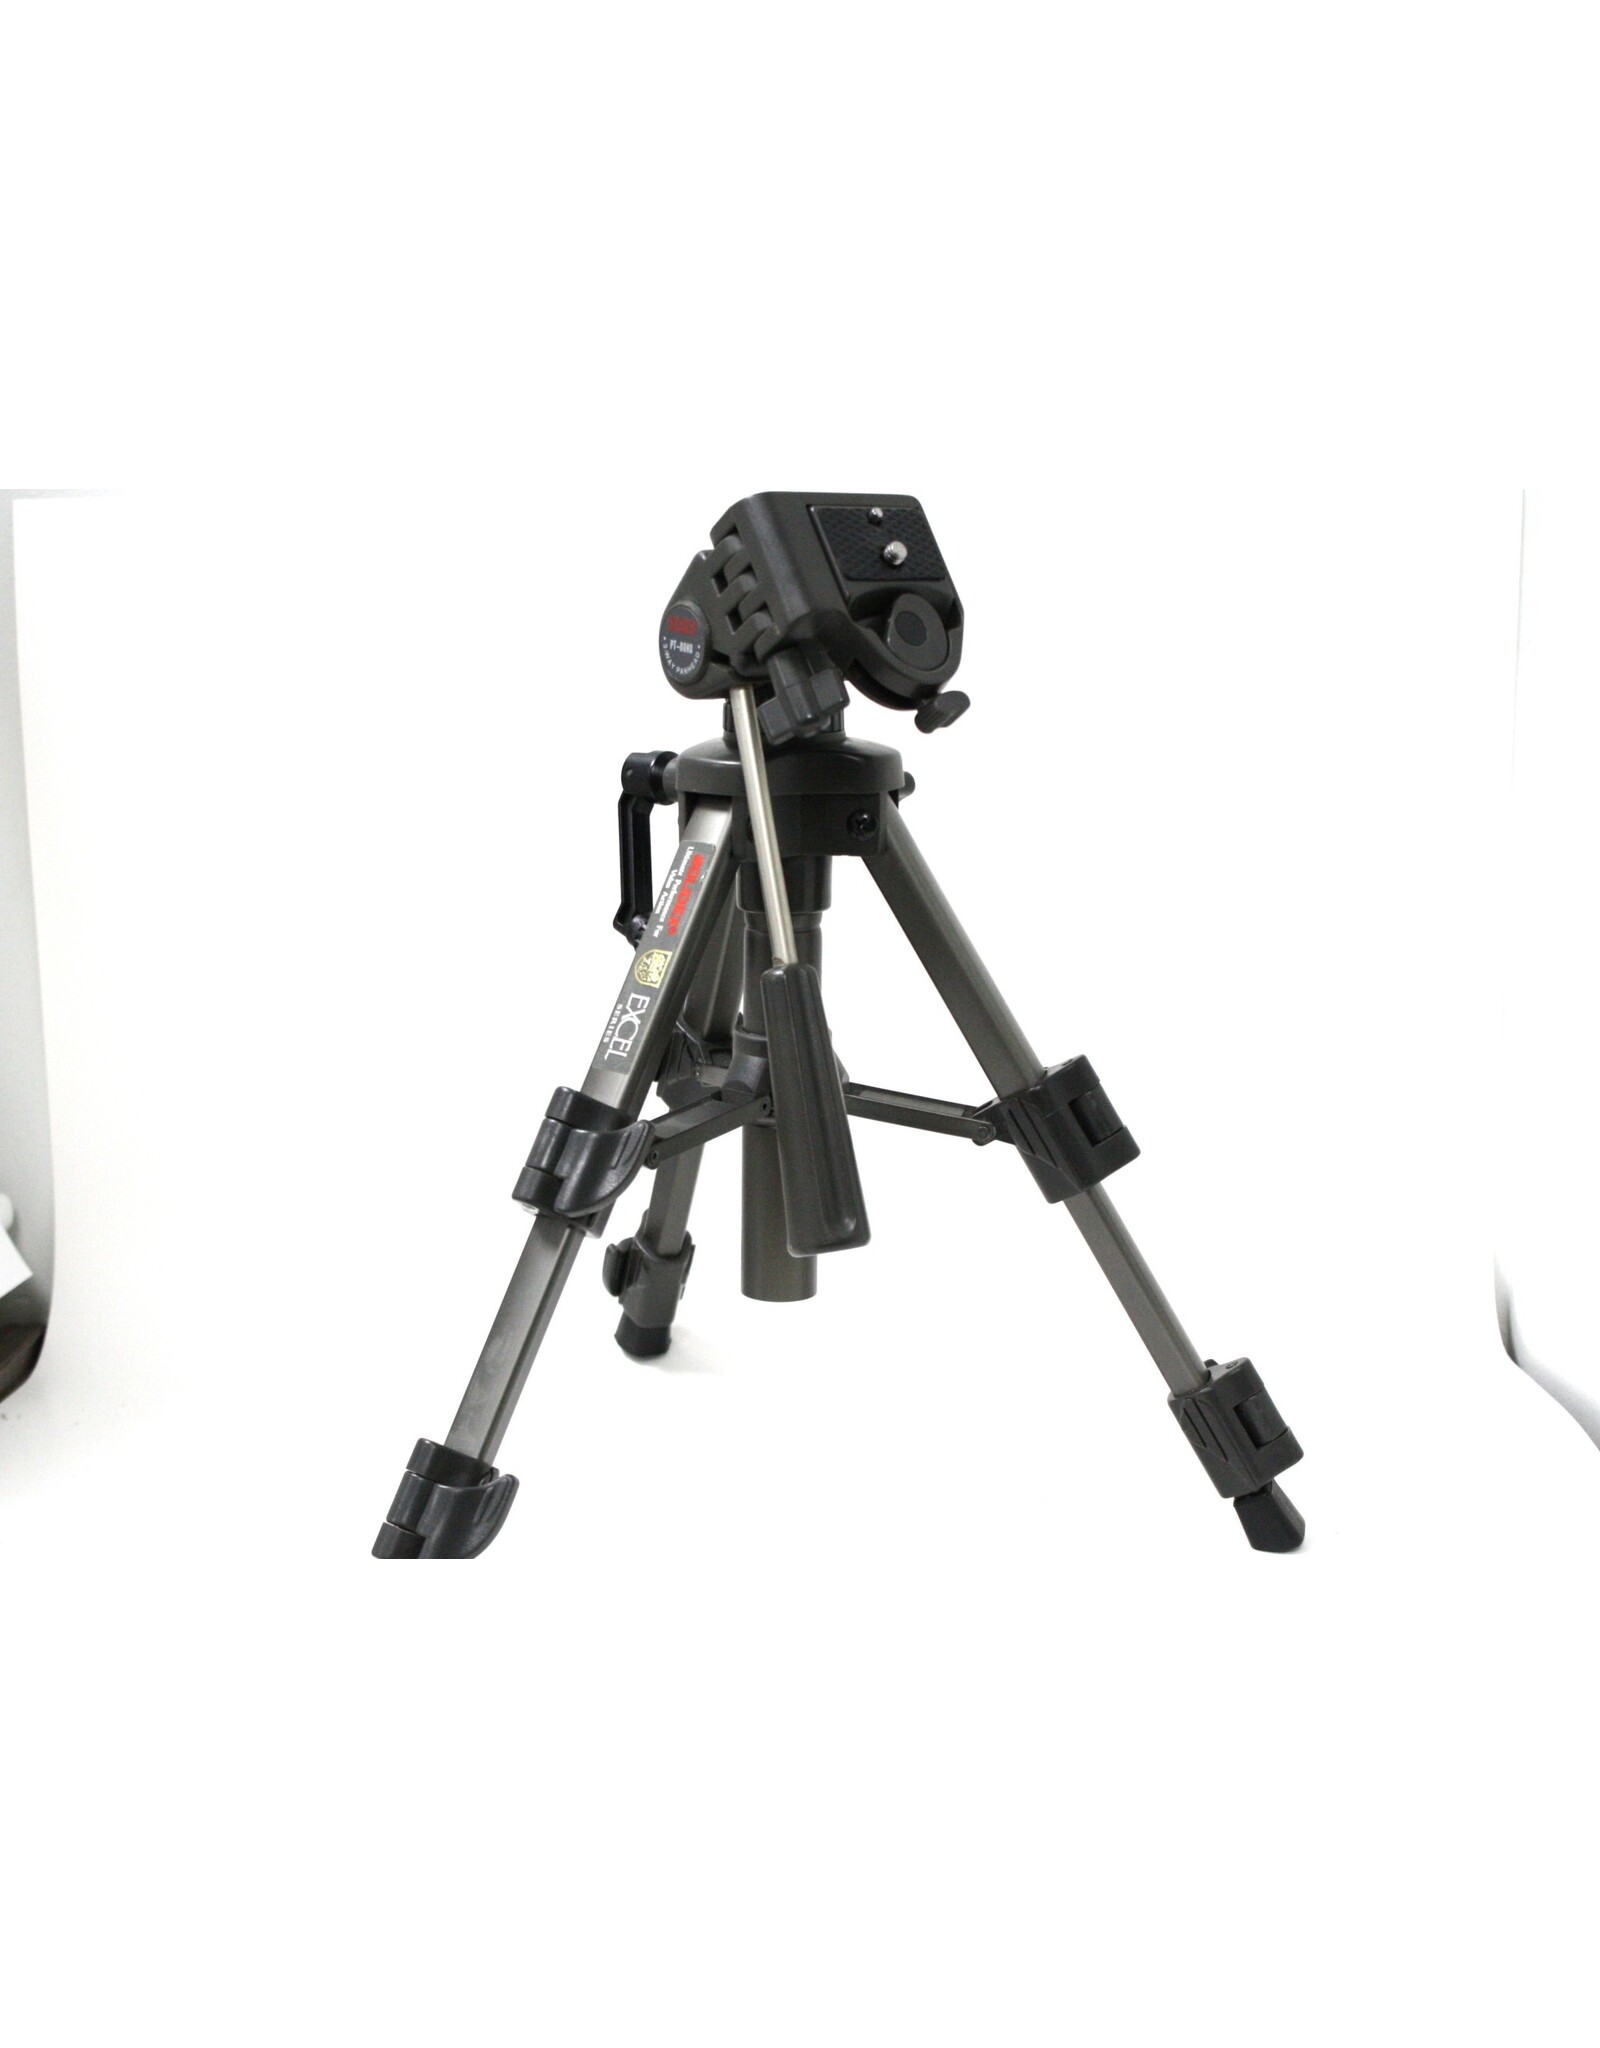 Solidex Excel Tabletop Tripod (Pre-owned)